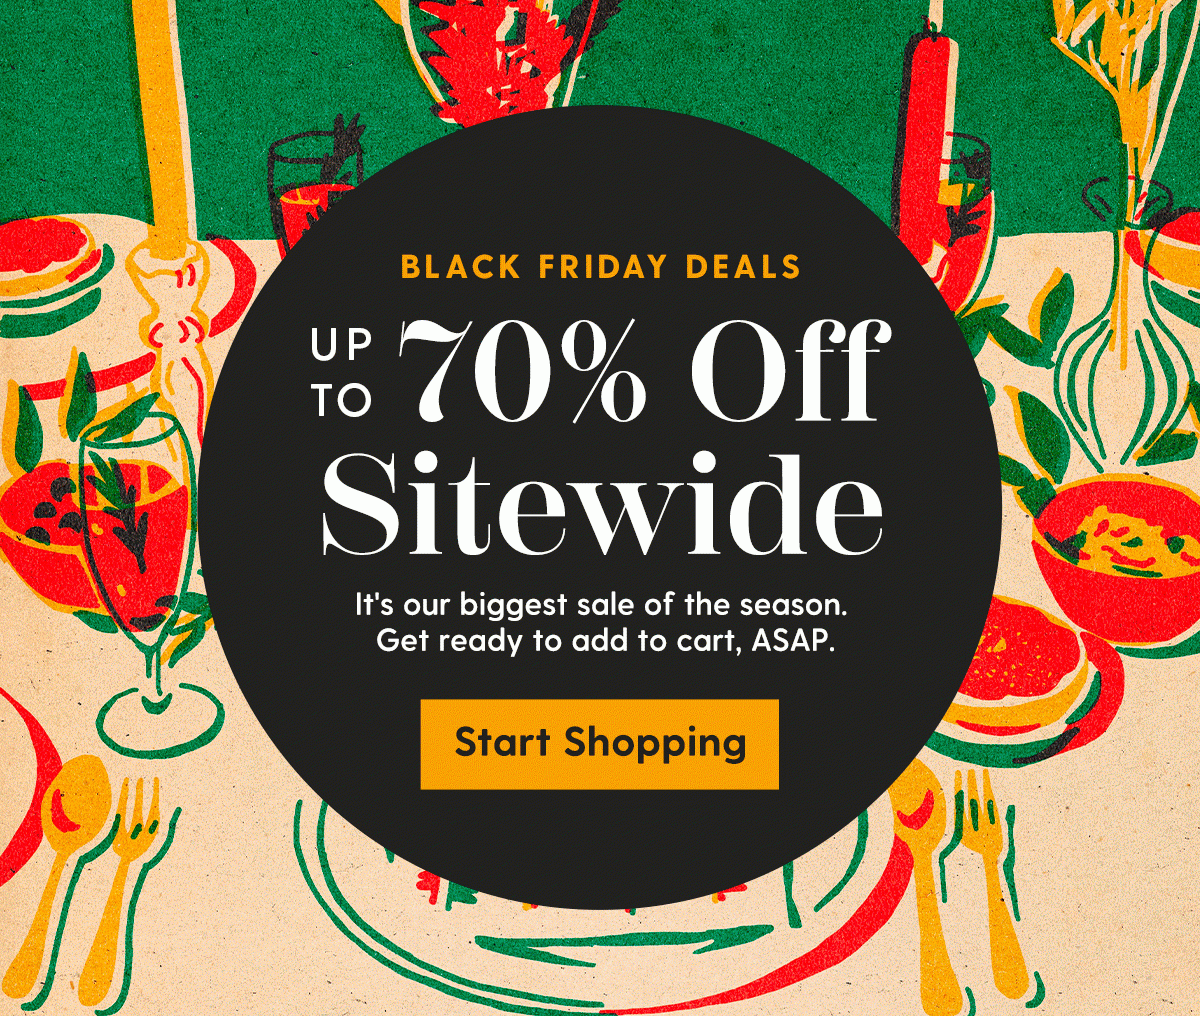 Black Friday Deals | Up to 70% Off Sitewide | It's our biggest sale of the season. Get ready to add to cart, ASAP | Start Shopping